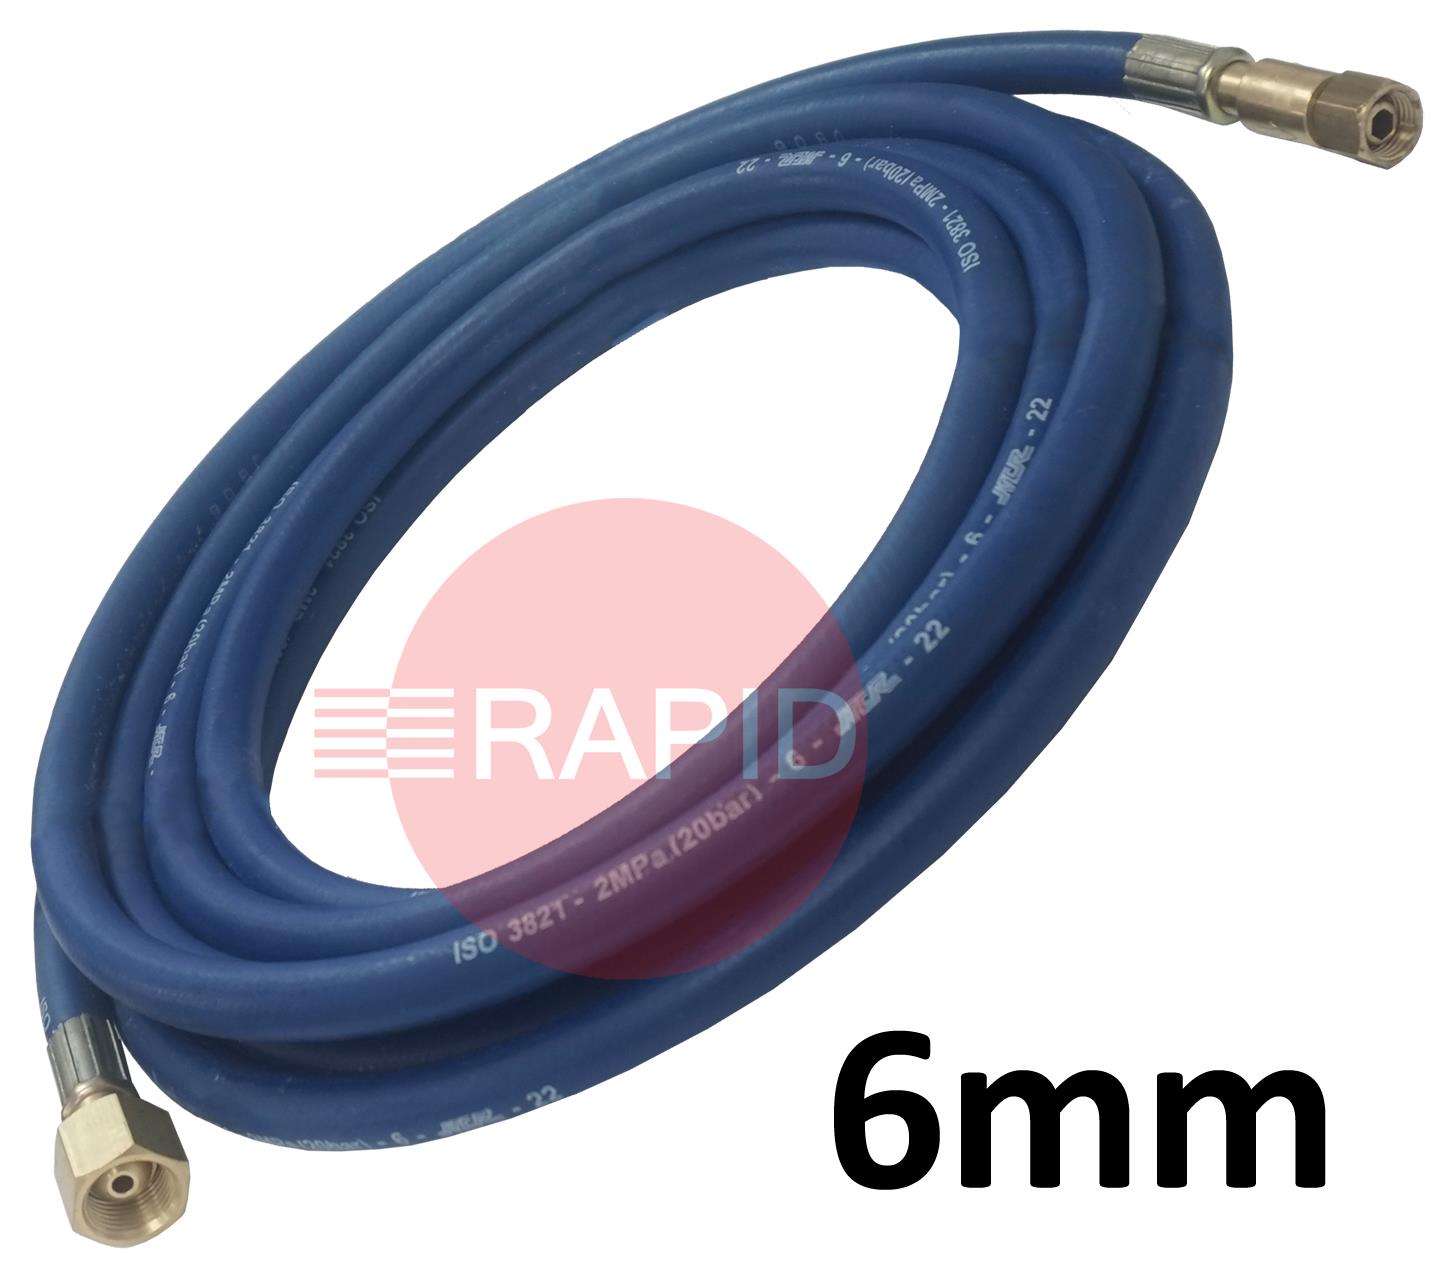 A5108  Fitted Oxygen Hose. 6mm Bore. G1/4 Check Valve & G3/8 Regulator Connection - 5m